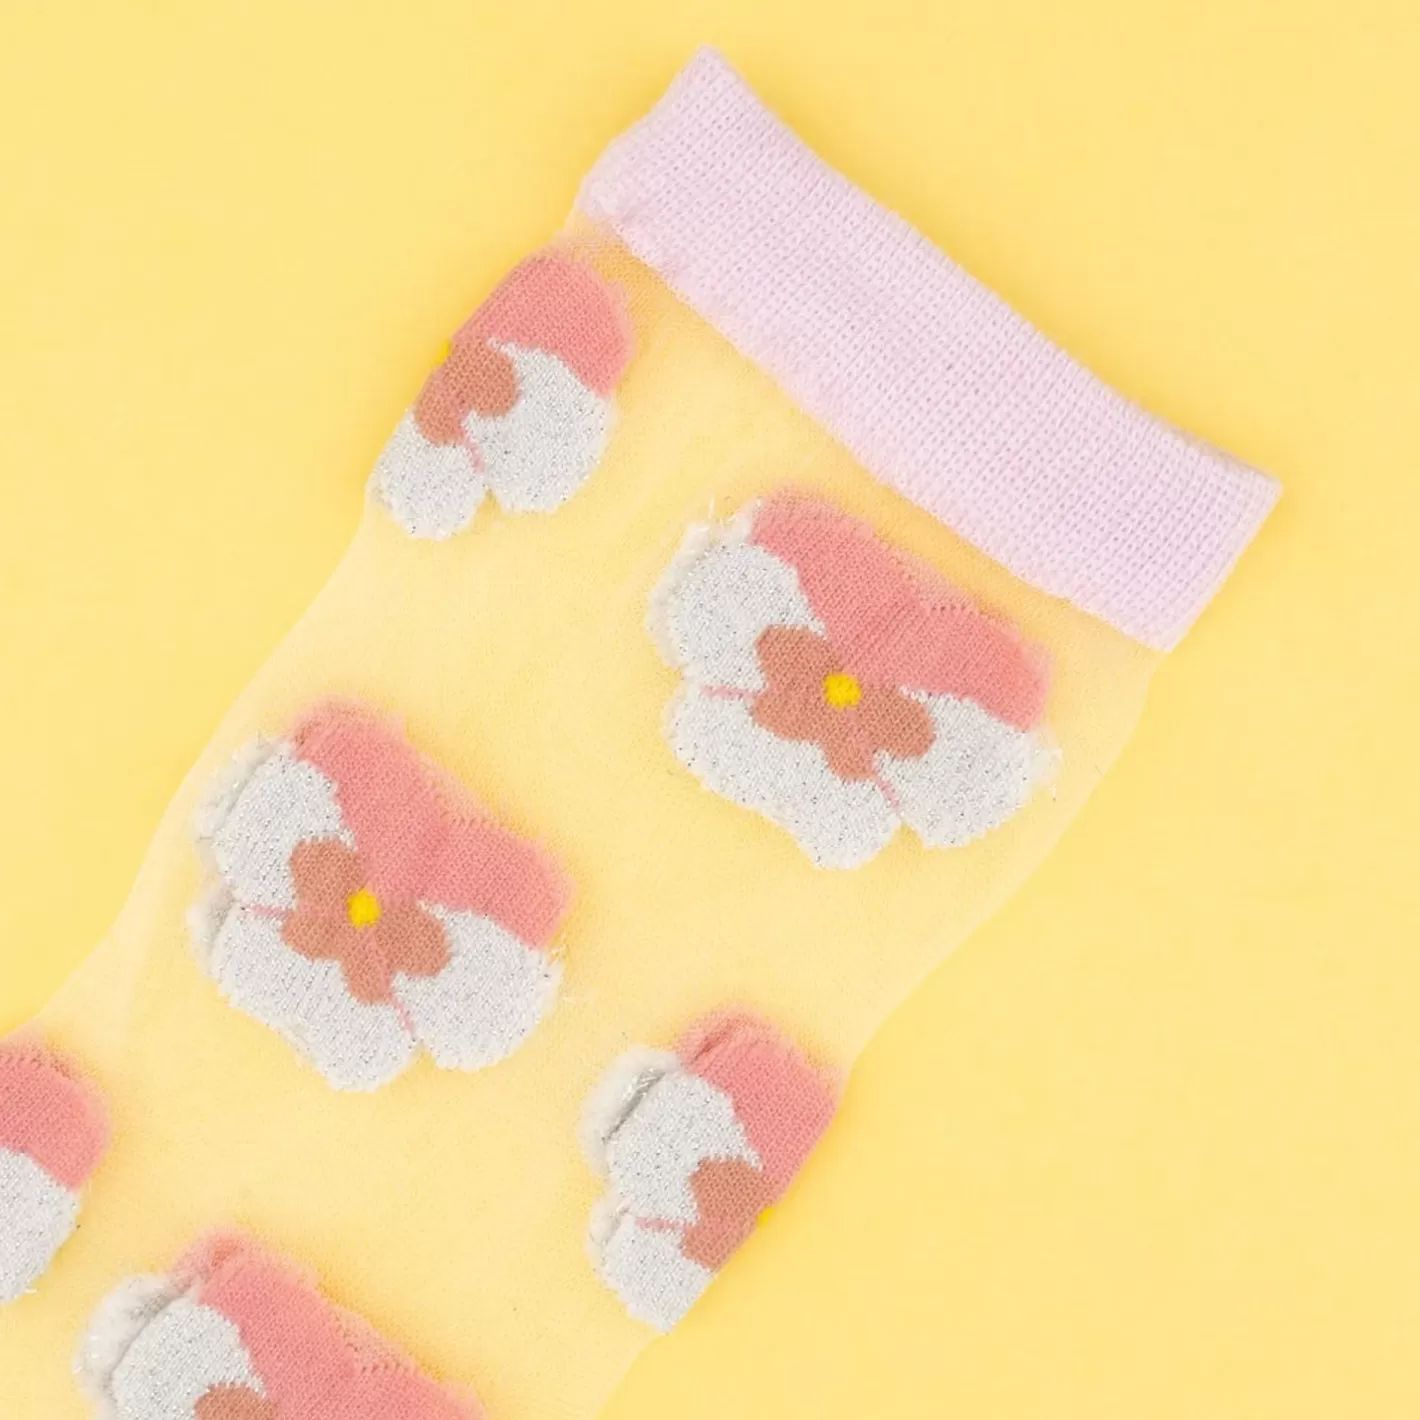 Pink Pansy Sheer Socks>Coucou Suzette Cheap